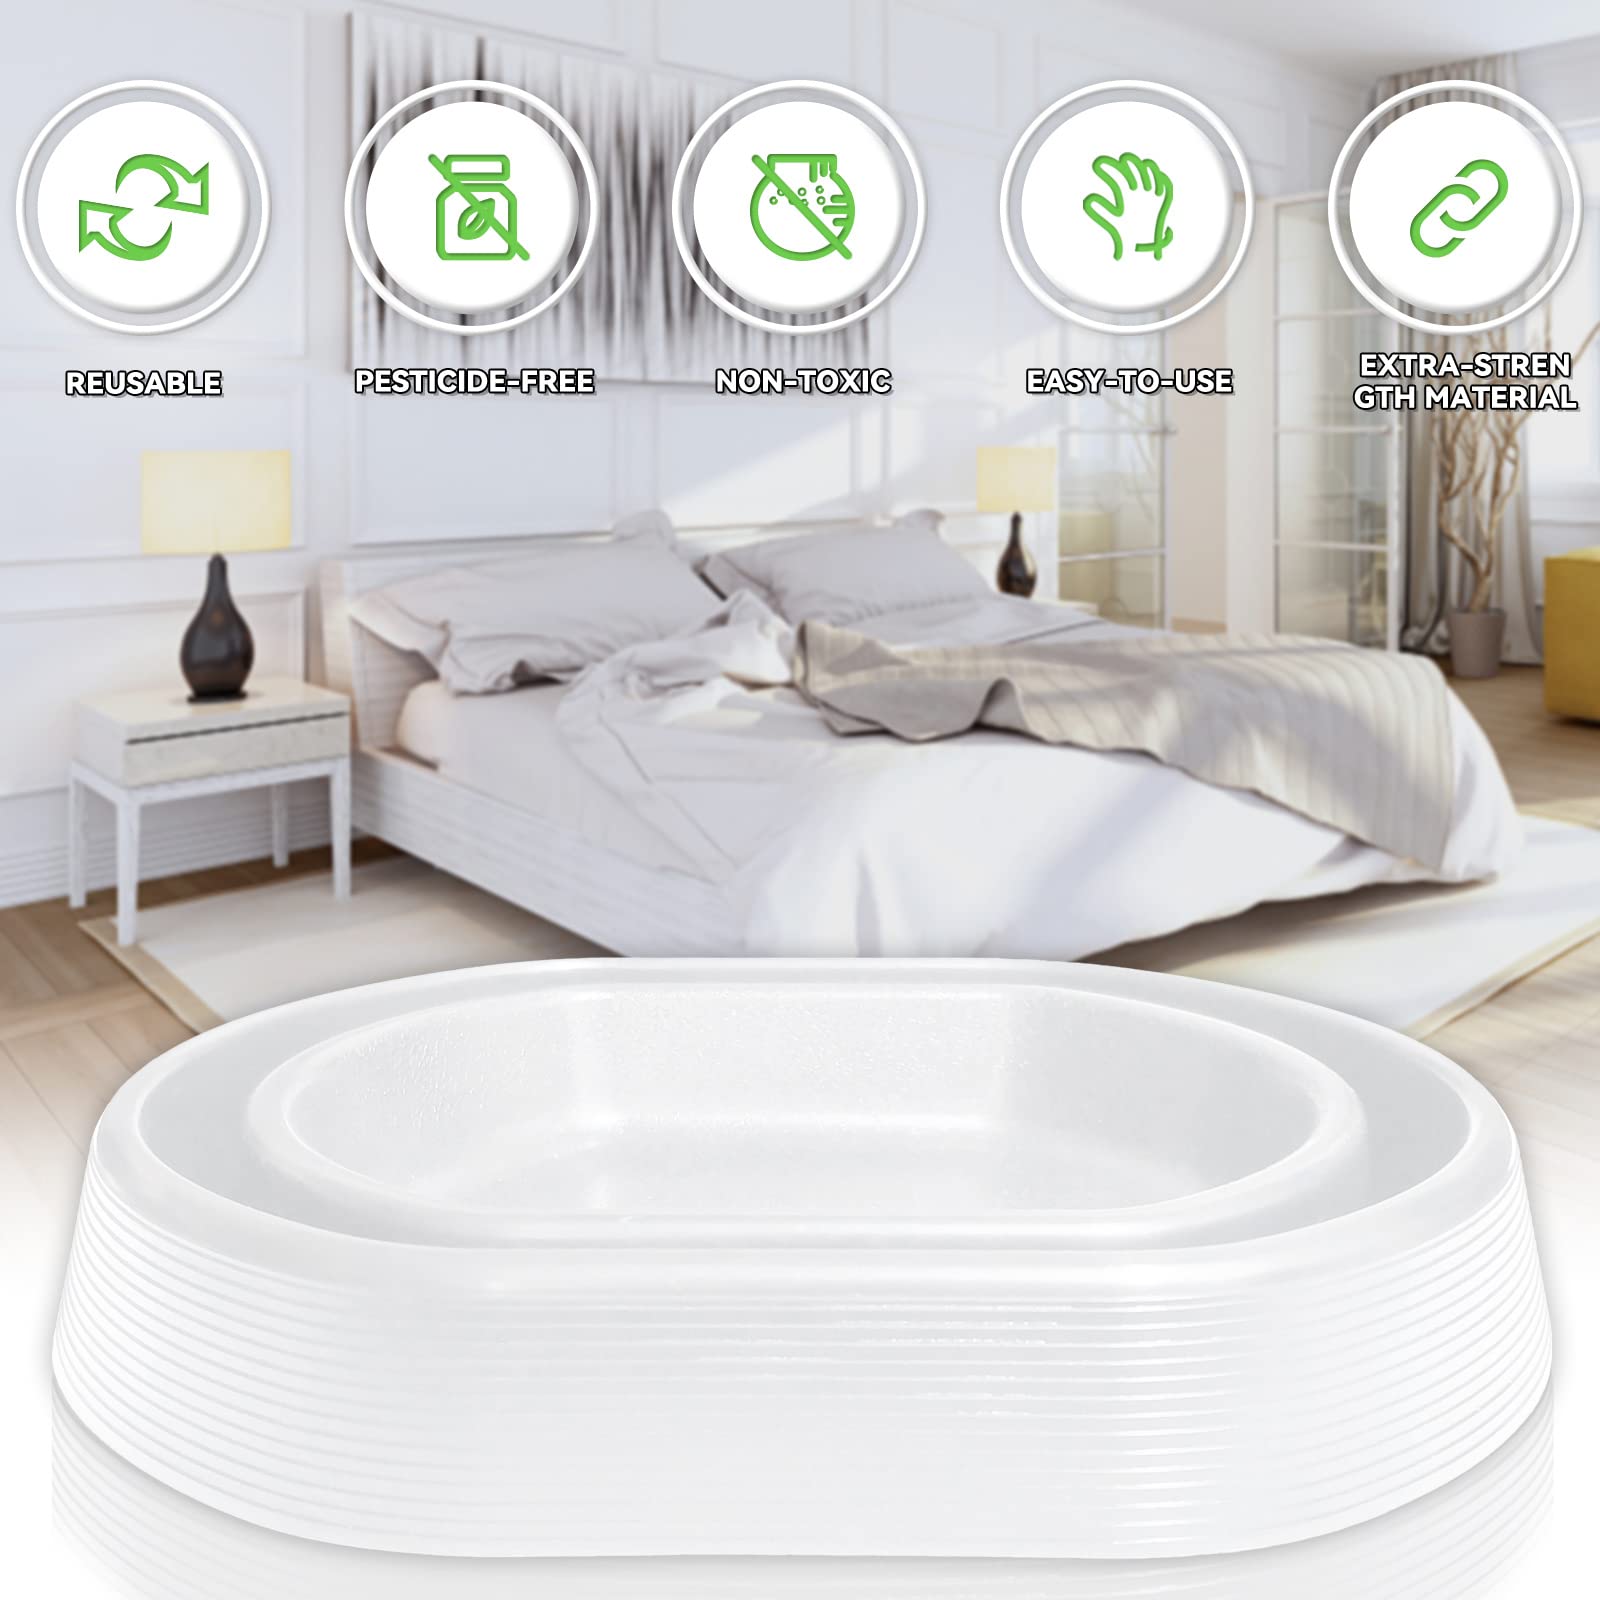 Bed Bug Interceptors | Bed Bug Interceptor Traps | Insect Trap, Monitor, and Detector for Bed Legs (White - 12 pcs)